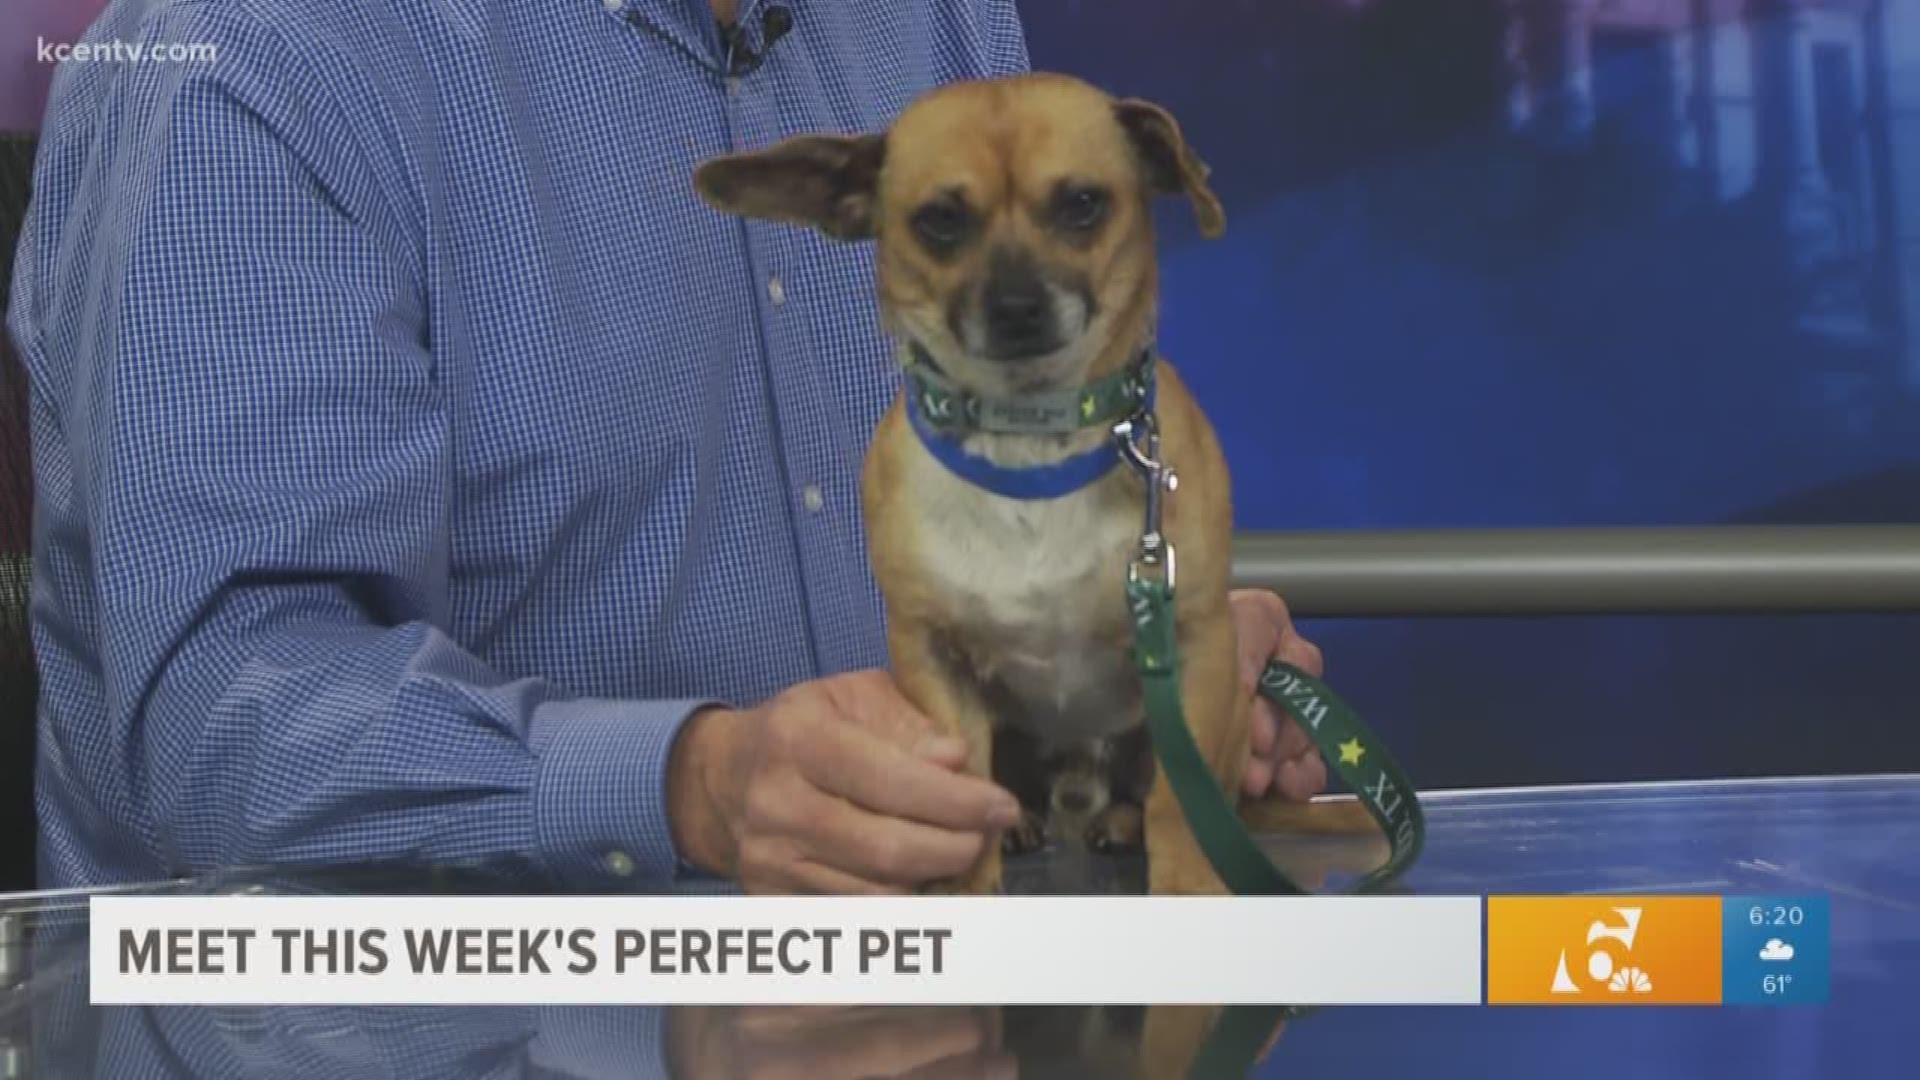 This 2-year-old, 10 pound male chihuahua is looking for a forever home, from the Humane Society of Central Texas.